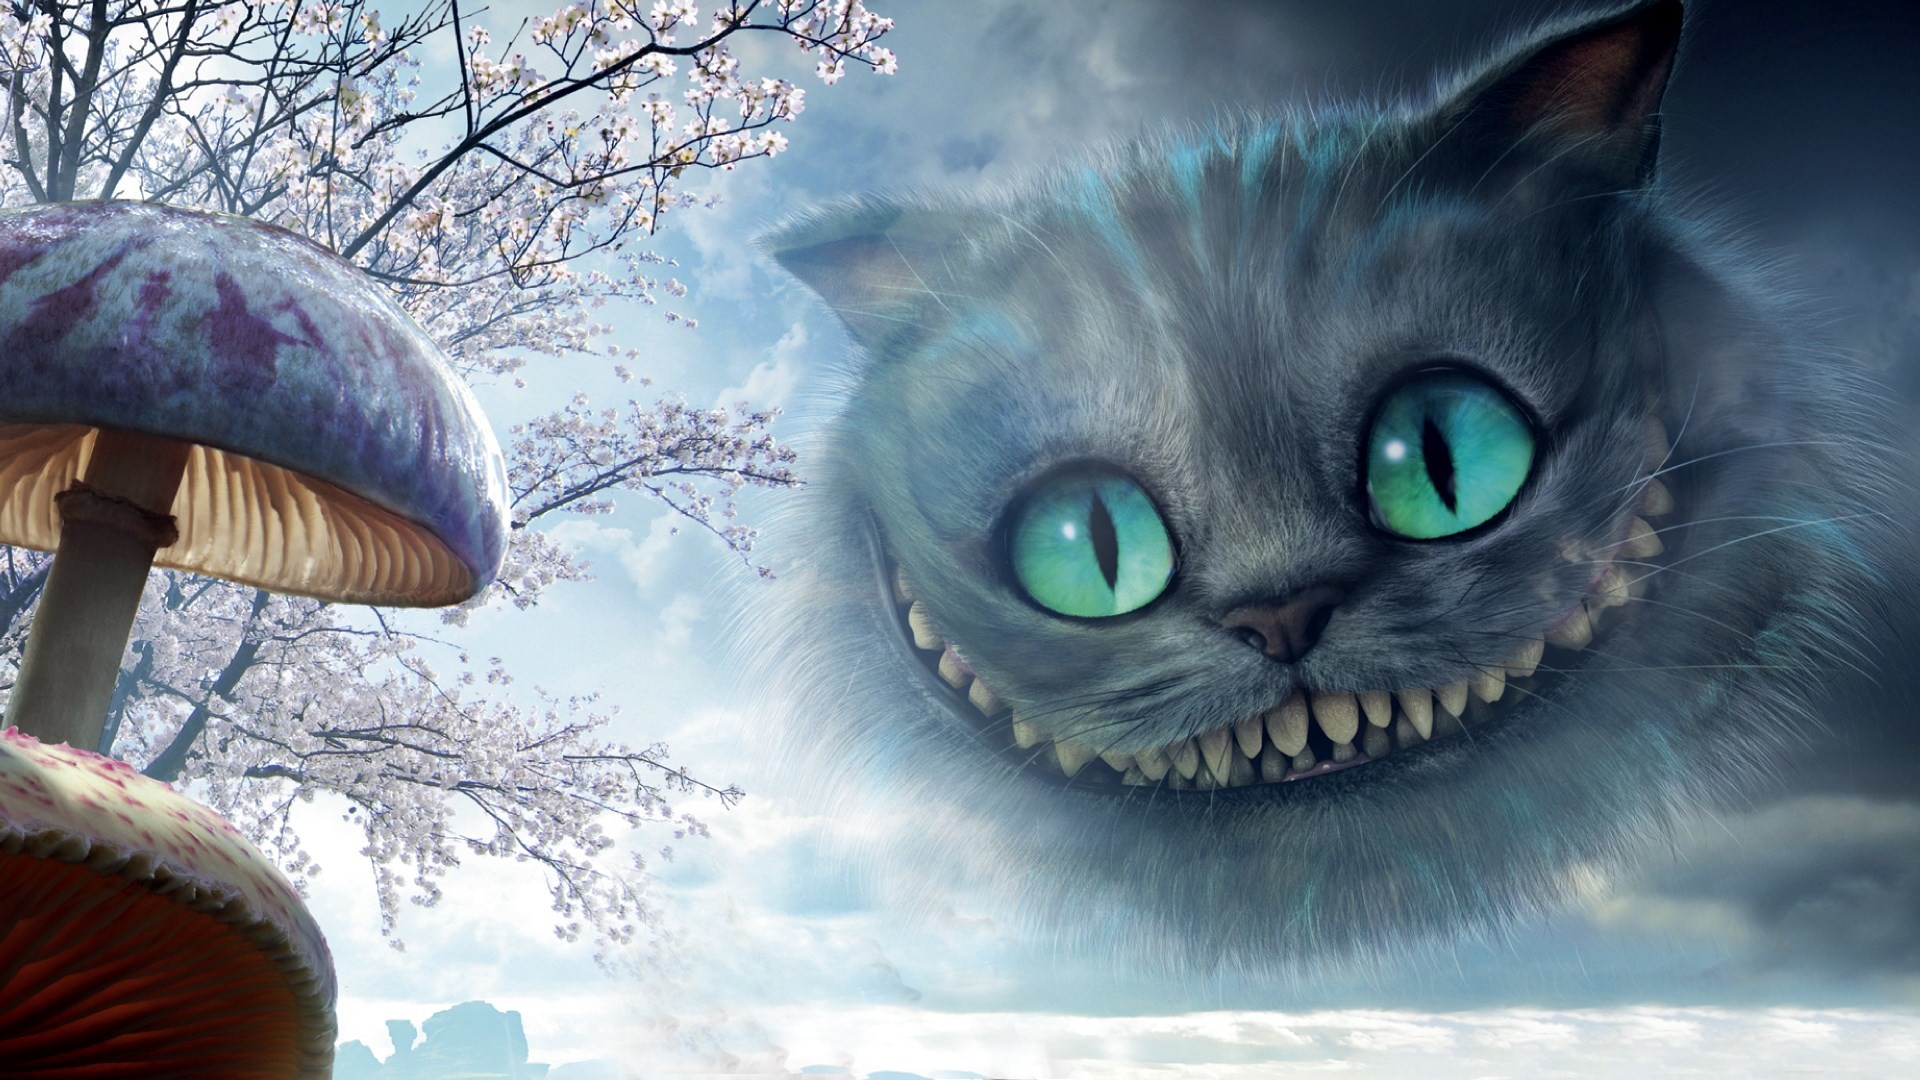 Cheshire Cat Wallpapers  Top 30 Best Cheshire Cat Wallpapers  HQ